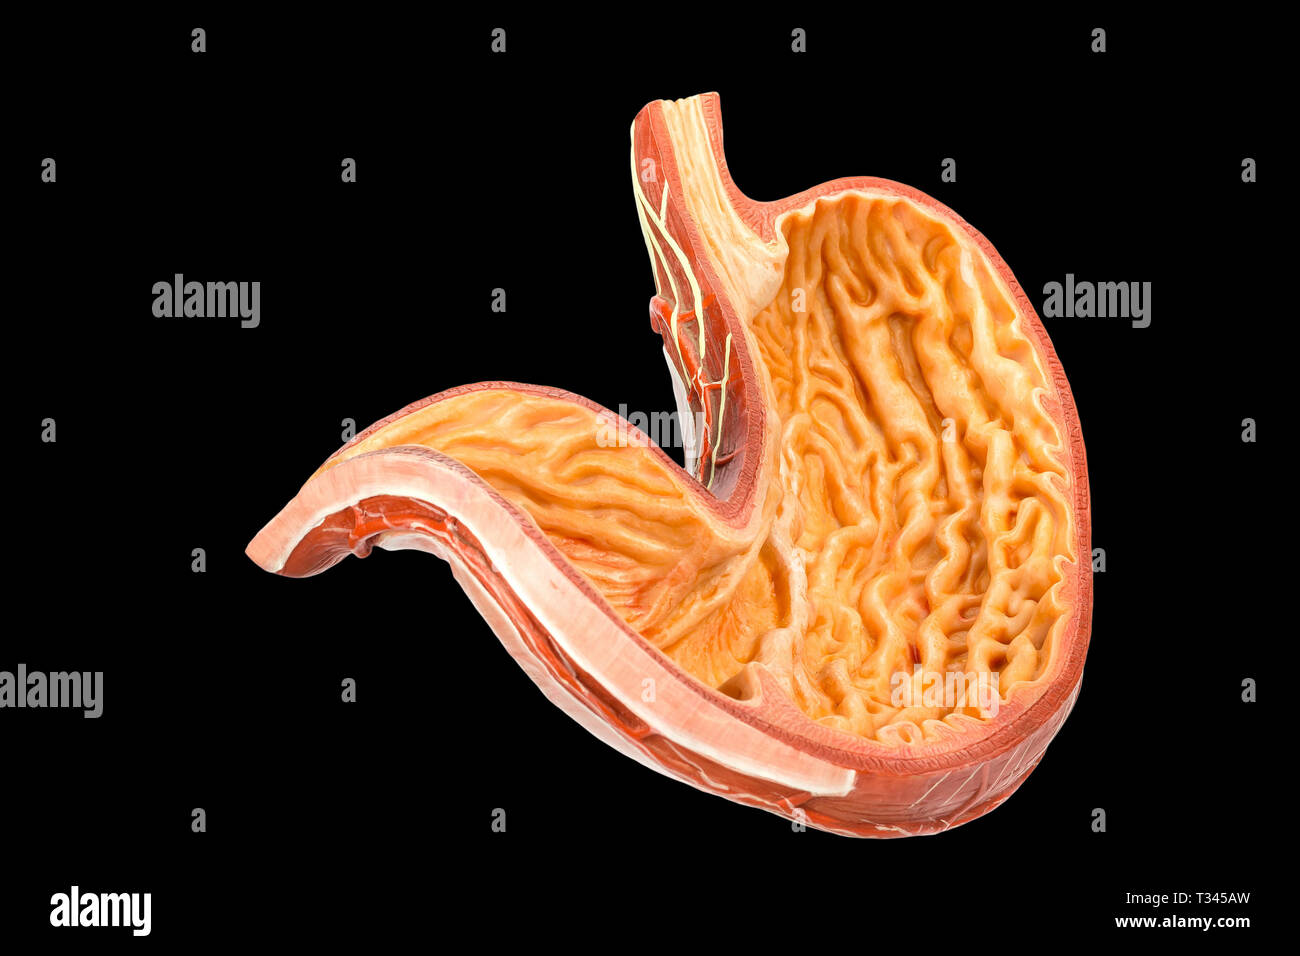 Inside of human stomach model isolated on black background Stock Photo